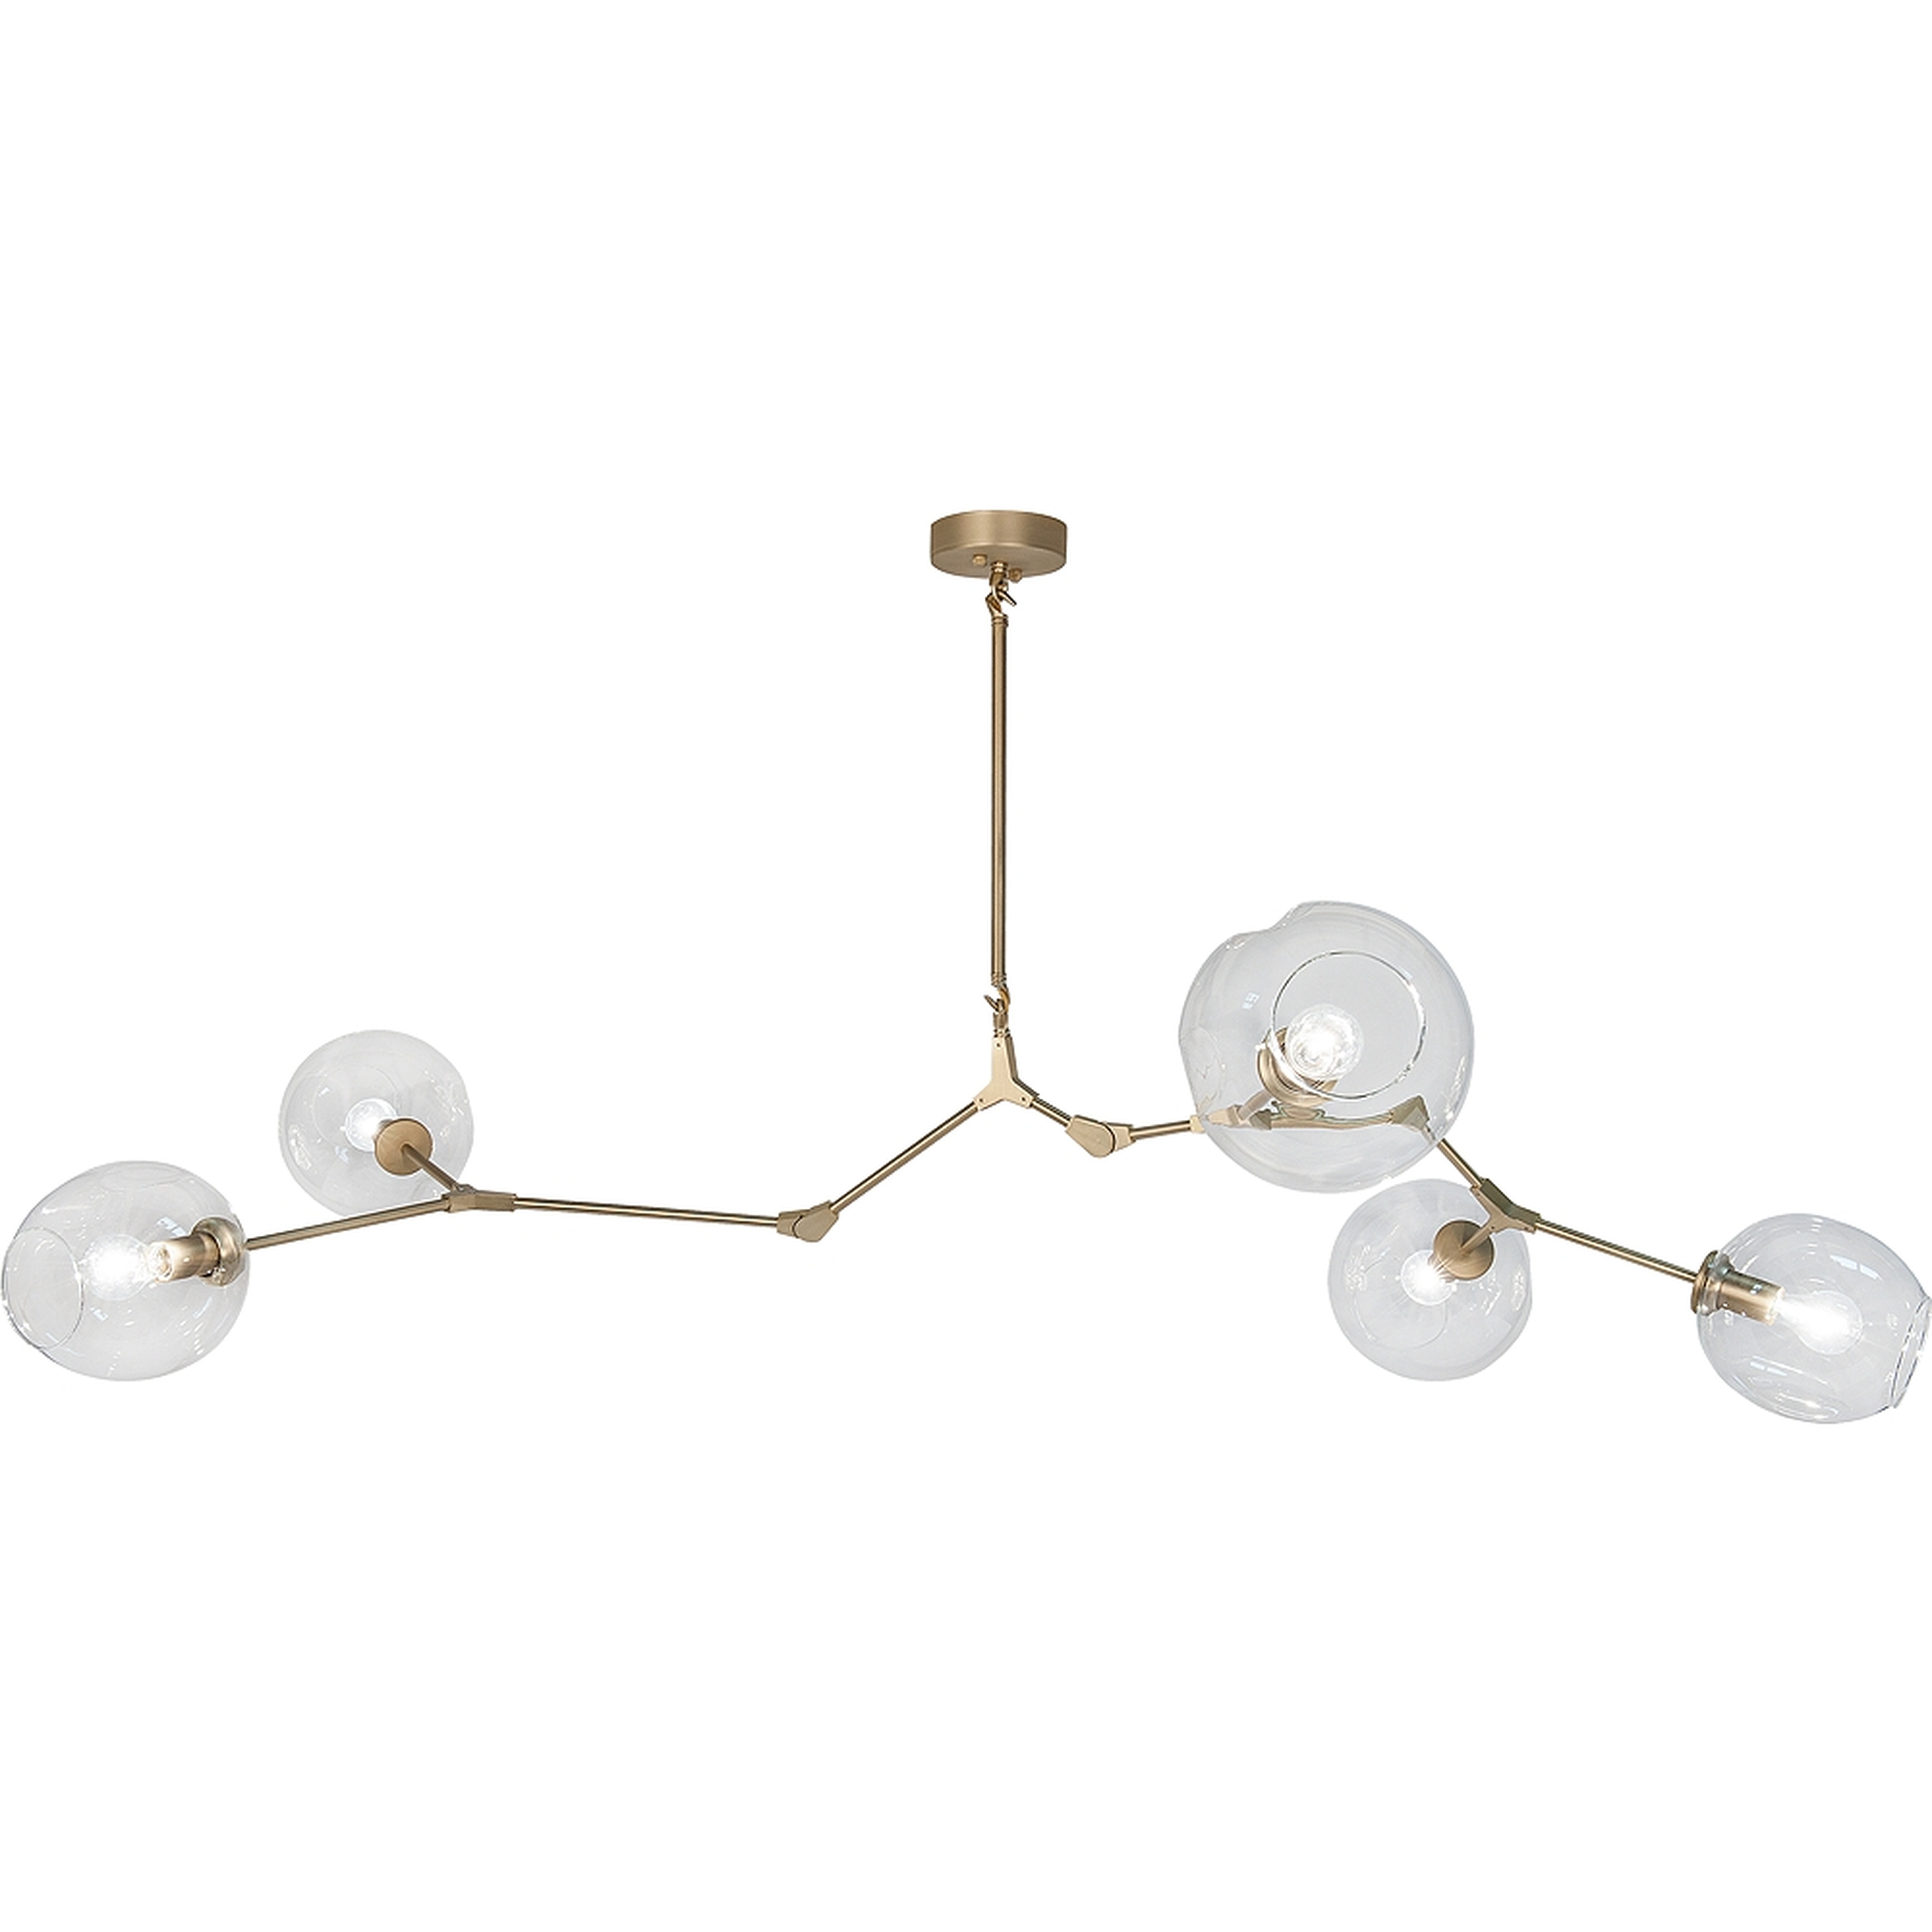 Avenue Fairfax 66"W Brushed Brass Chandelier - Style # 12M70 - Lamps Plus